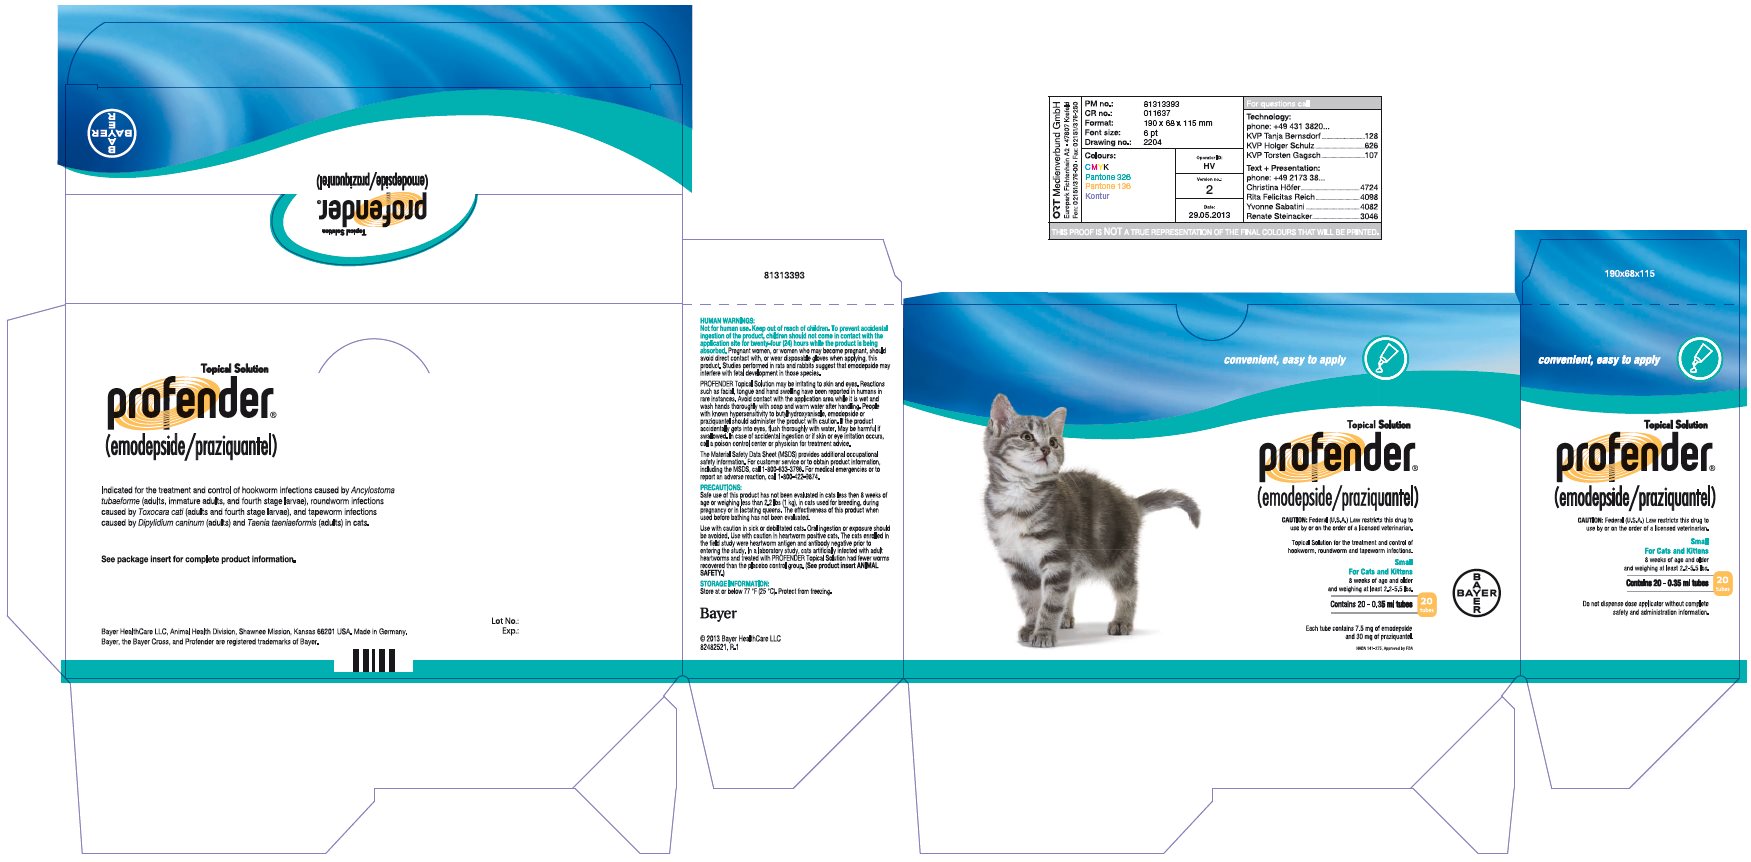 Profender (emodepside/praziquantel) Topical Solution for small cats and kittens (2.2 - 5.5 lbs) 20 (0.35 ml) tubes label